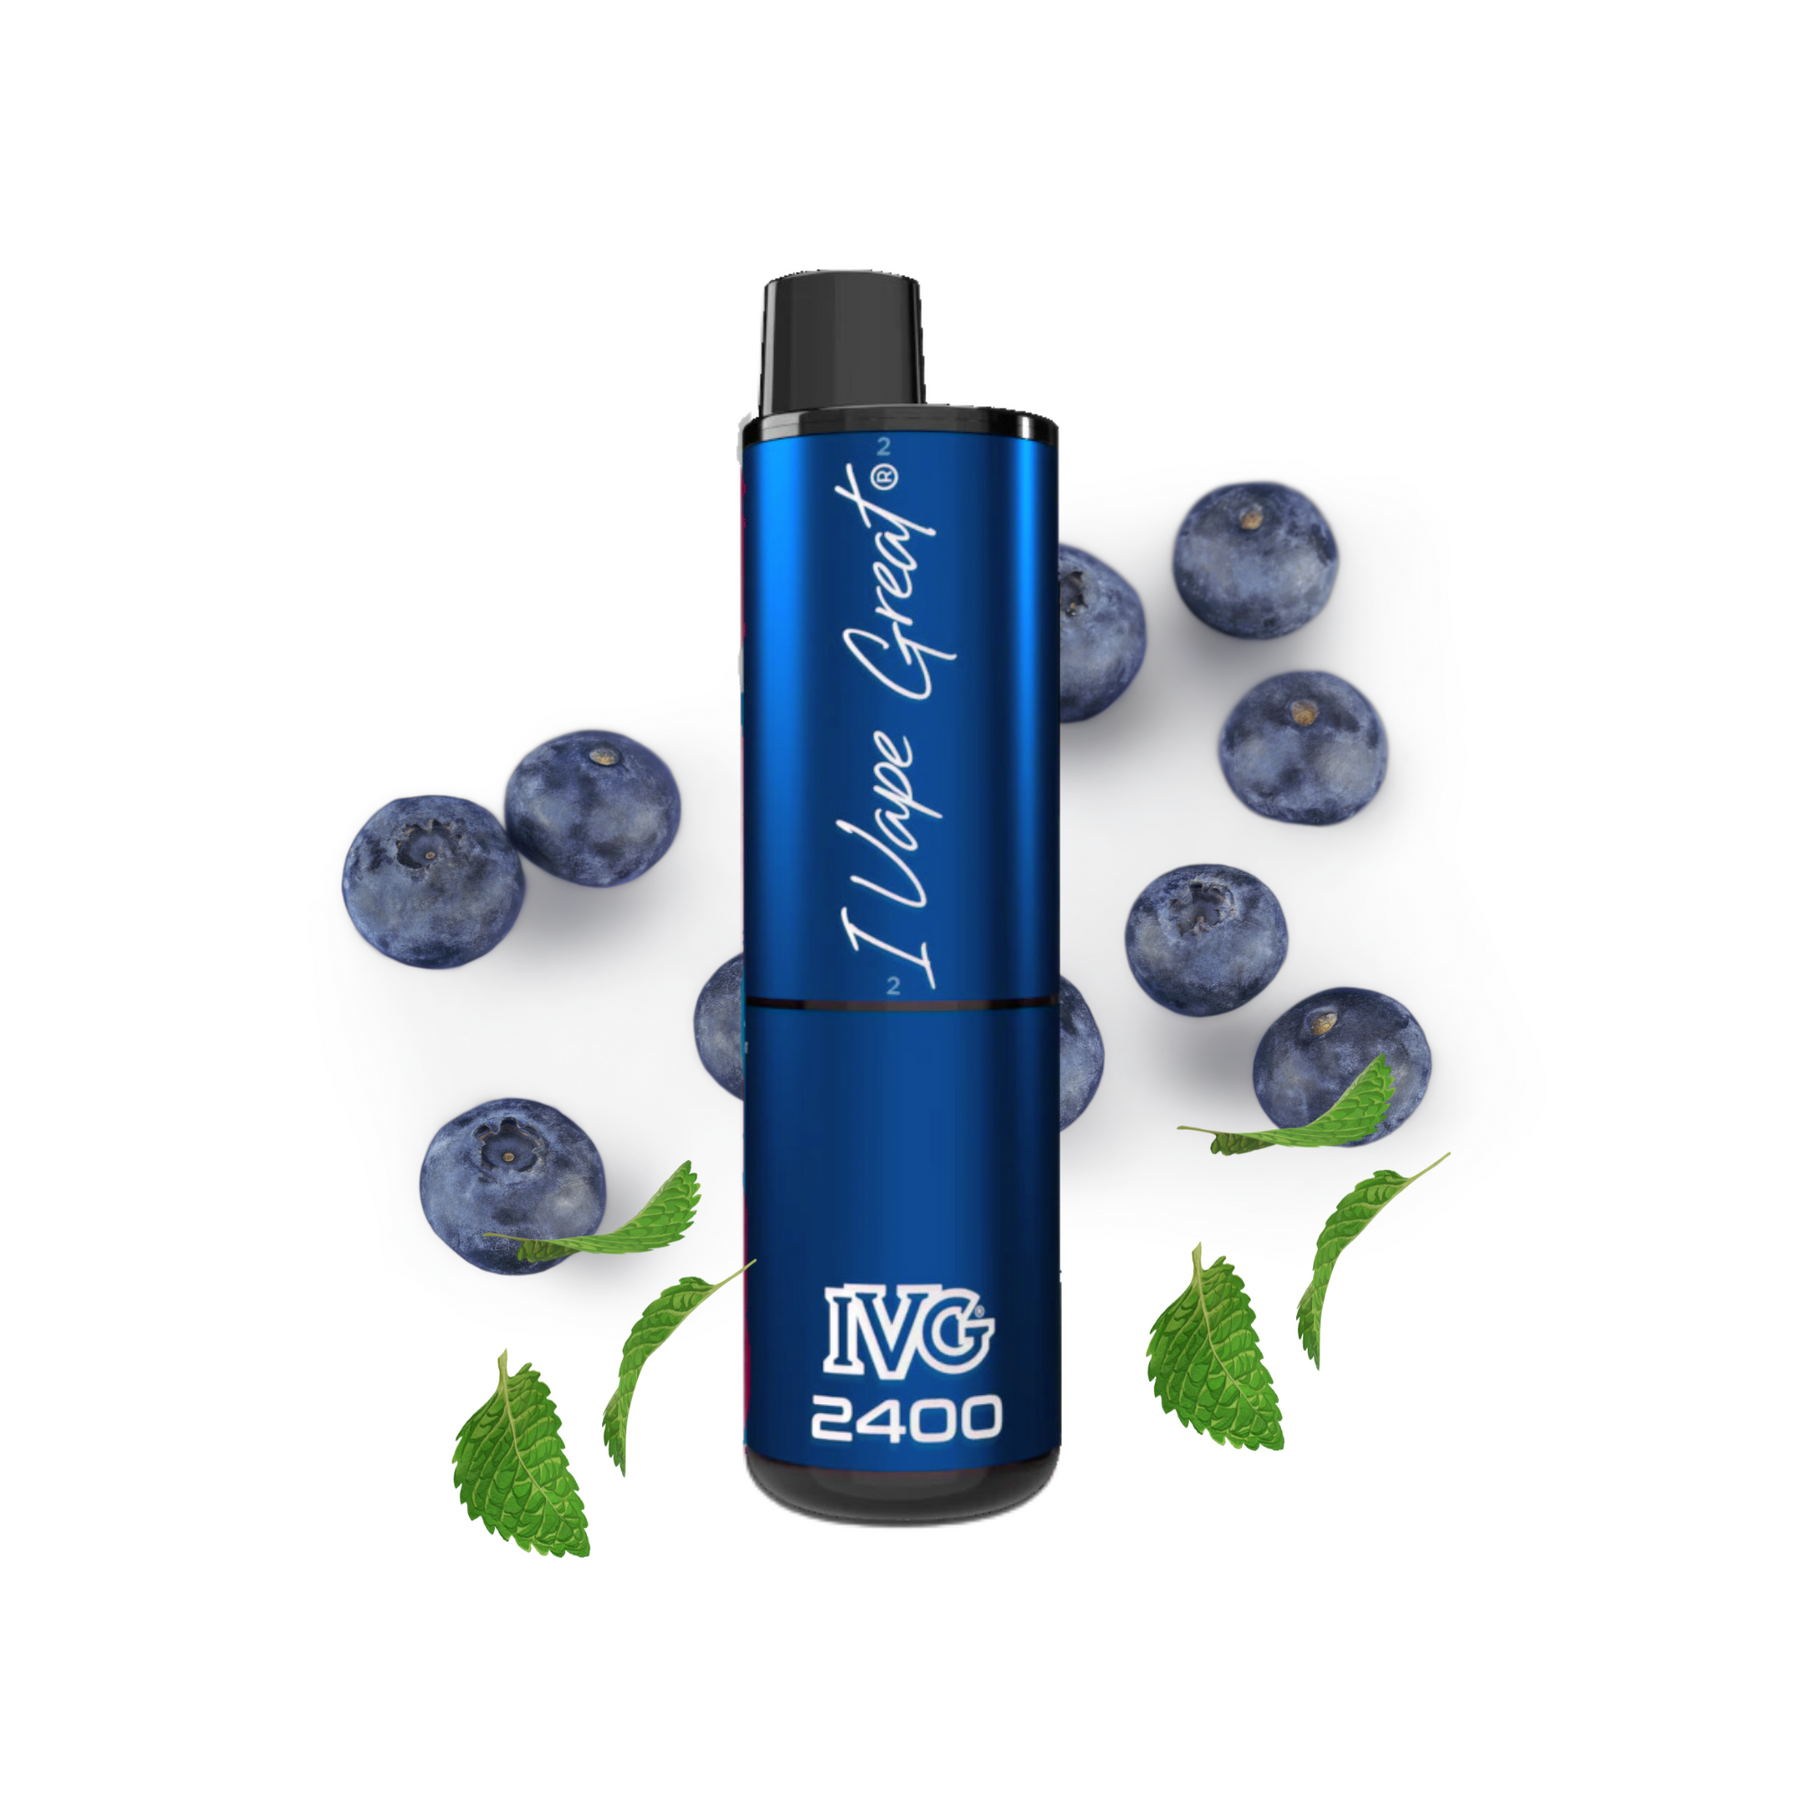 IVG 2400 puff - MULTI BLUE Edition 4 in 1